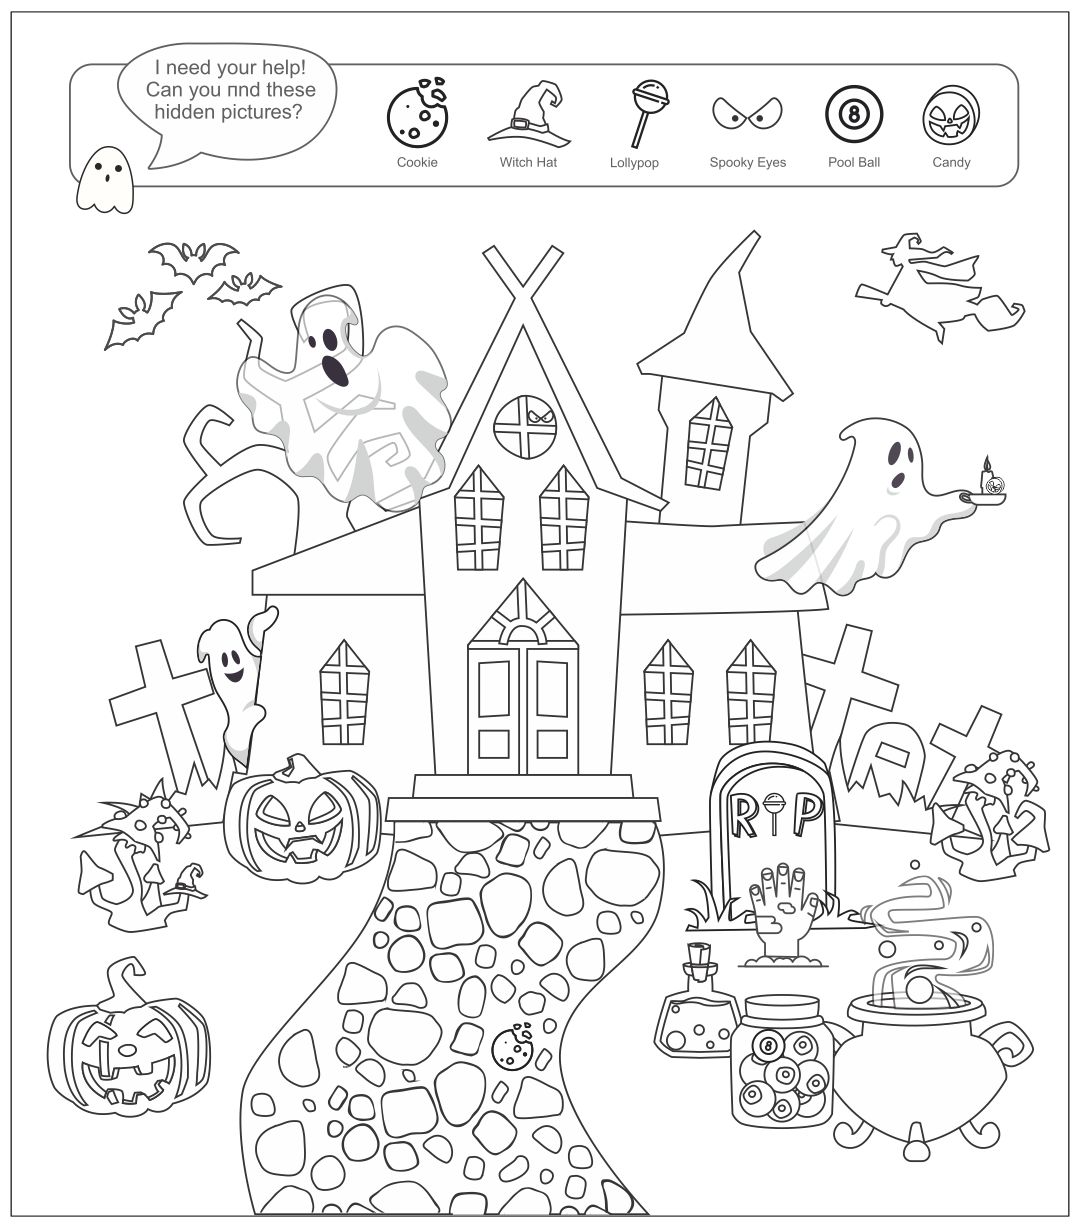 15-best-halloween-hidden-picture-printable-pdf-for-free-at-printablee